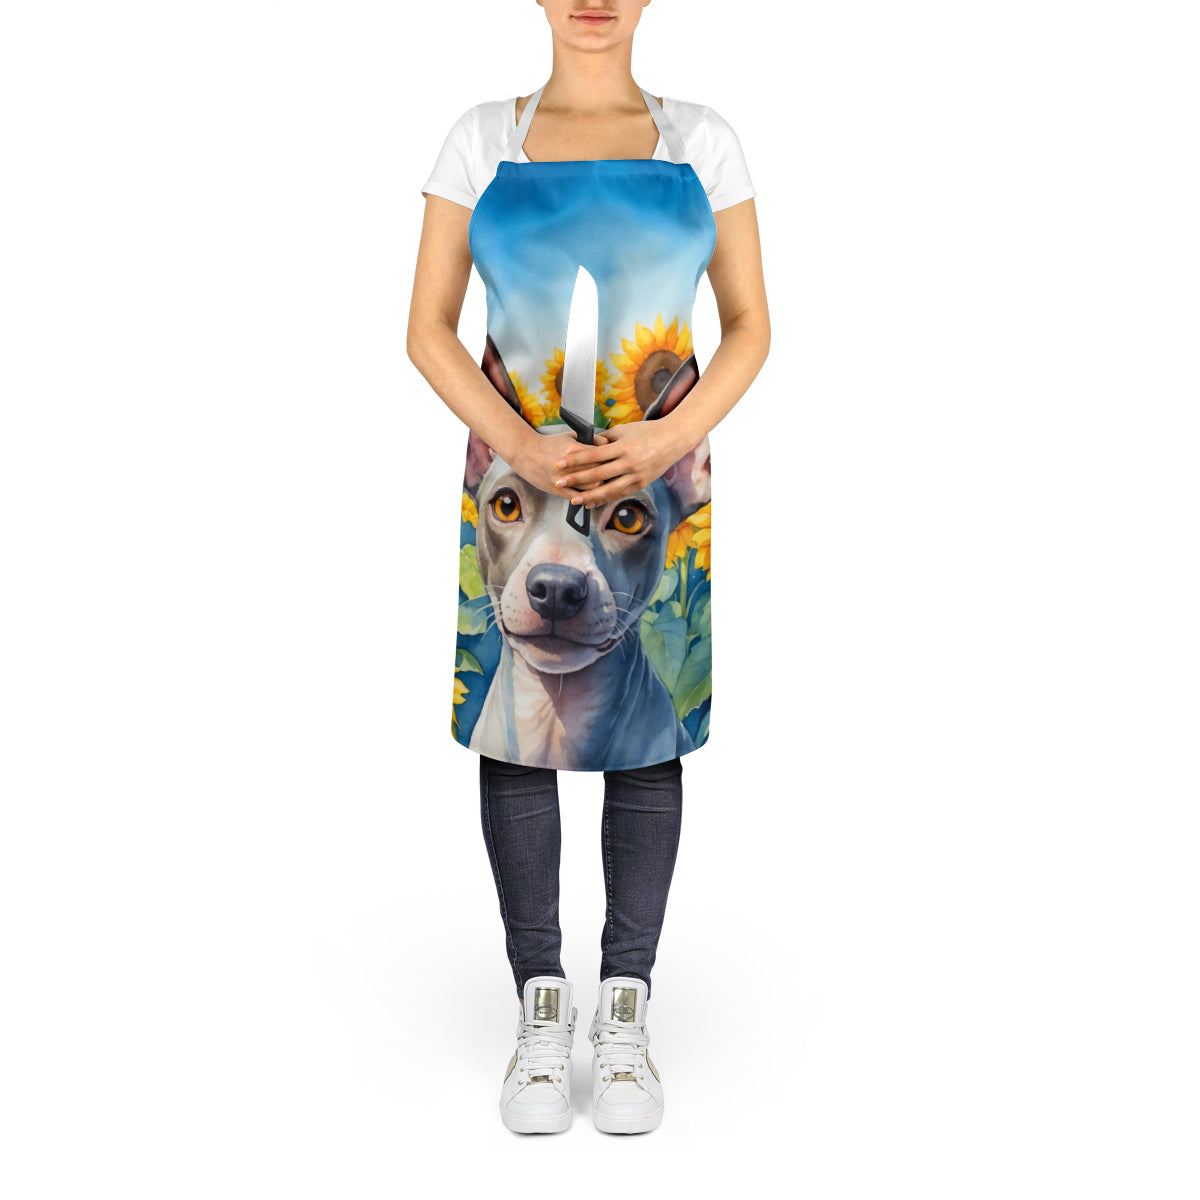 American Hairless Terrier in Sunflowers Apron